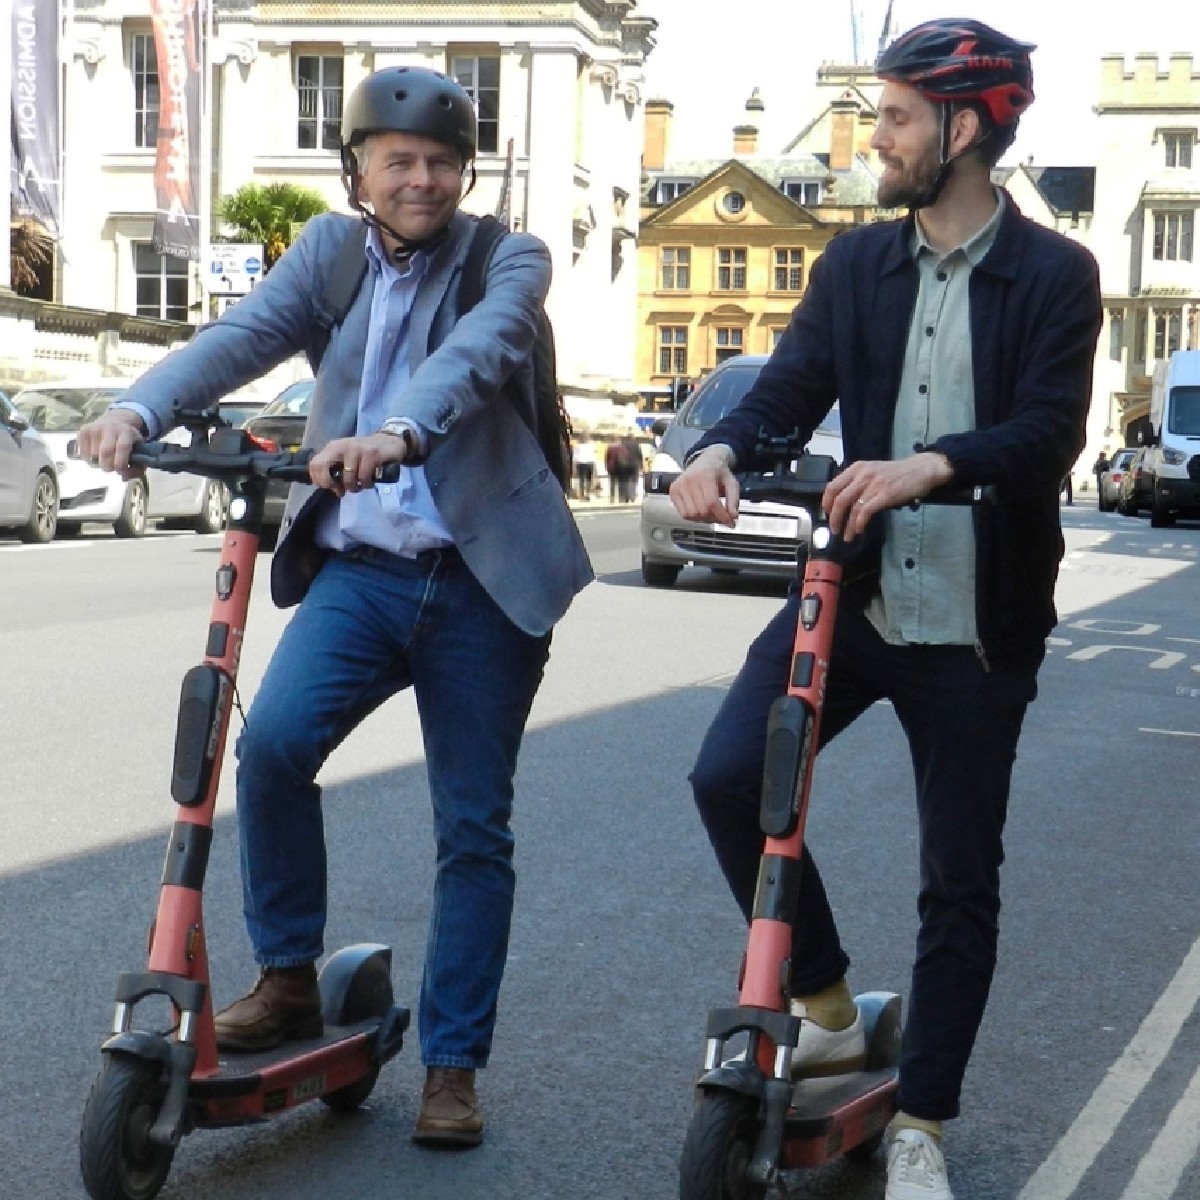 People in Oxford can take advantage of a free 30 minutes Voi public hire e-scooter use valid from Clean Air Day on 15 June, until 30 June. See more from public hire e-scooter operator Voi here: news.cision.com/voi-technology…  
#CleanAirDay2023